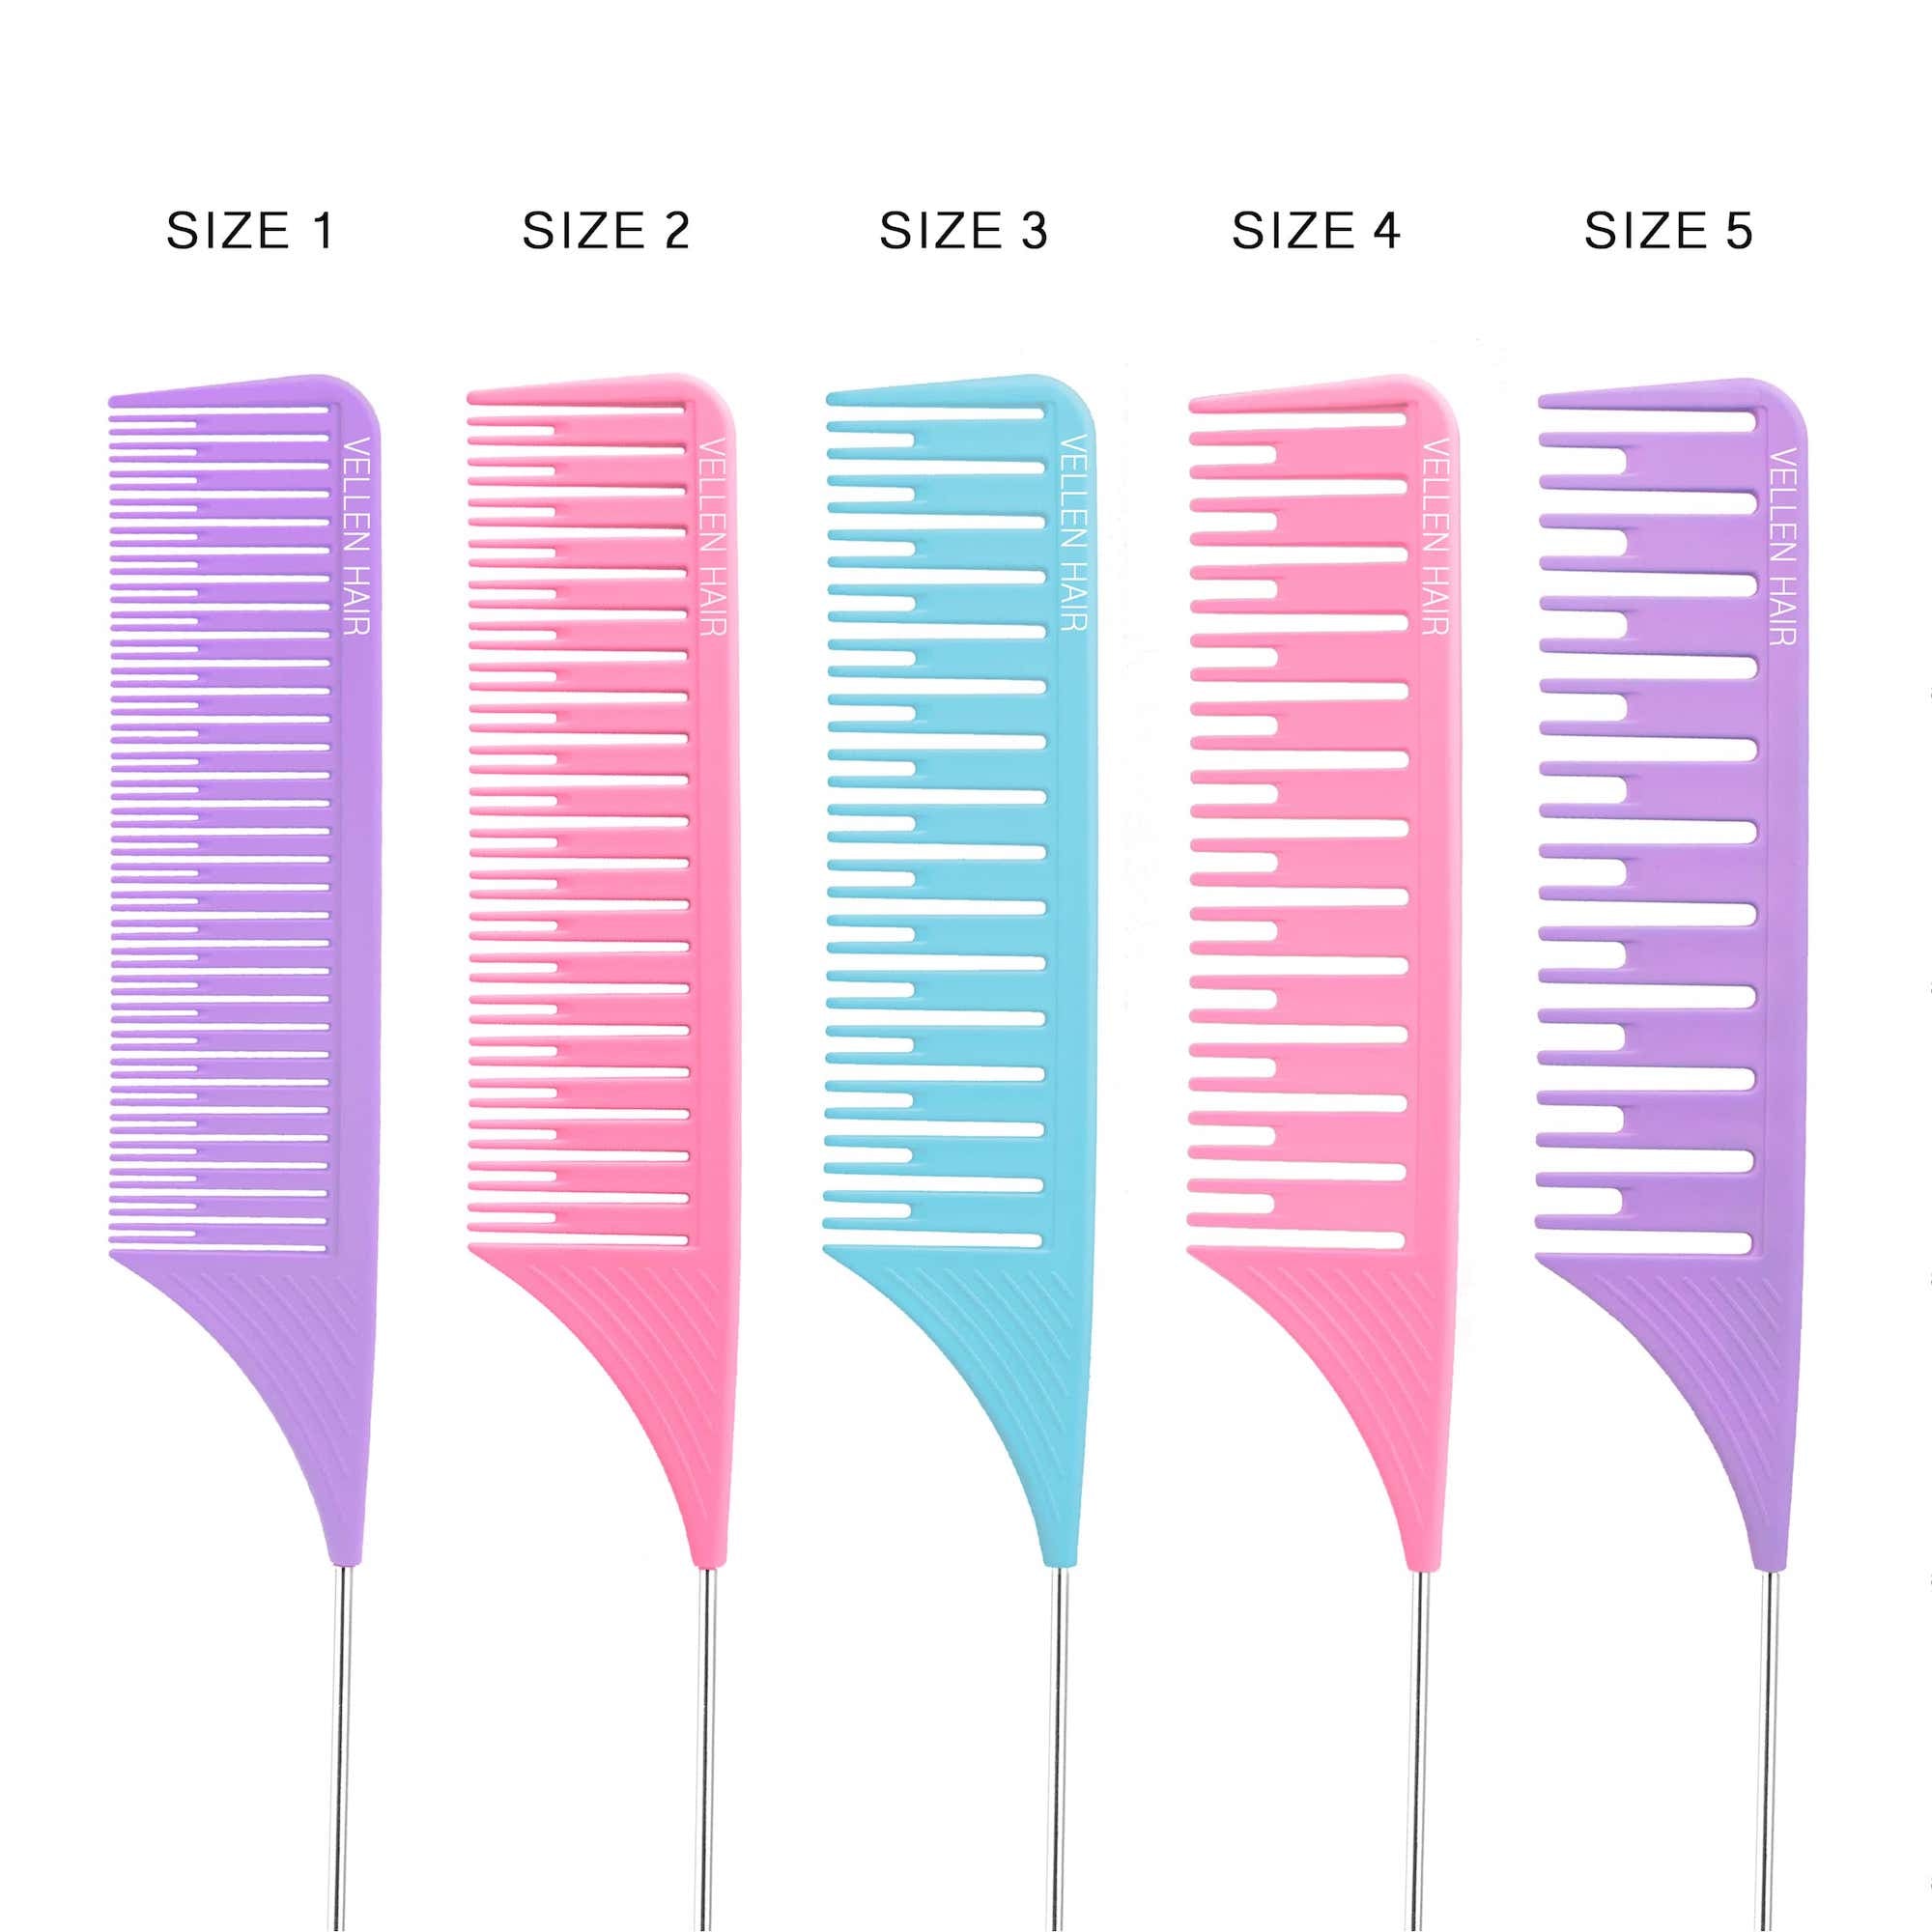 Ultimate Highlighting Comb Set 2.0 - 5 Sizes - Purple/Pink